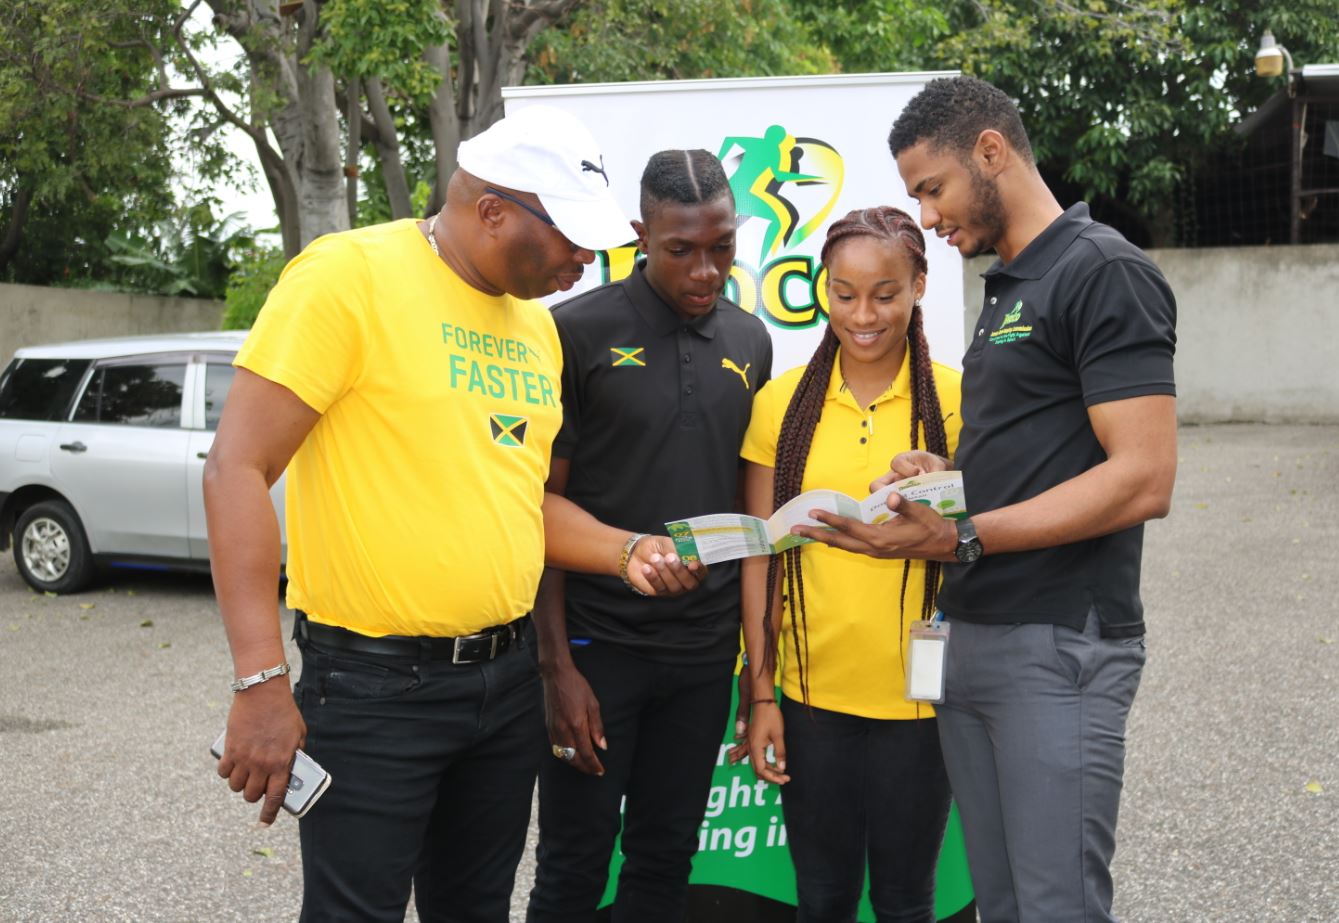 JADCO CONDUCTS ANTI-DOPING WORKSHOP FOR 2019 CARIFTA GAMES ATHLETES